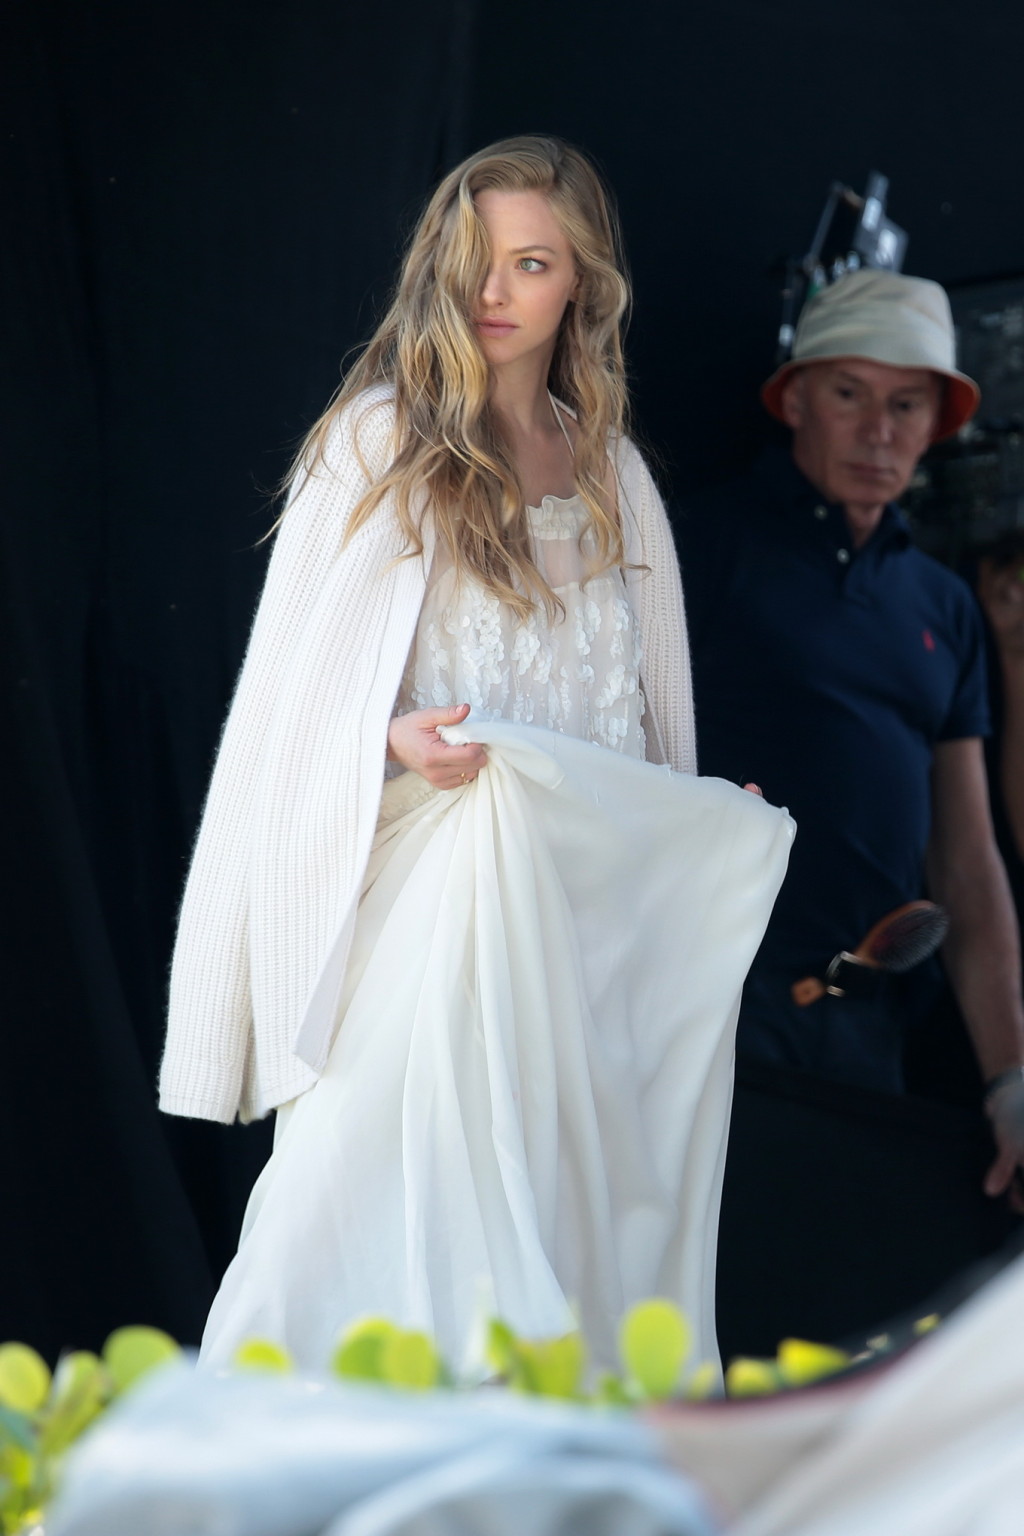 Amanda Seyfried showing boobs in white transparent nightie while filming video i #75172454